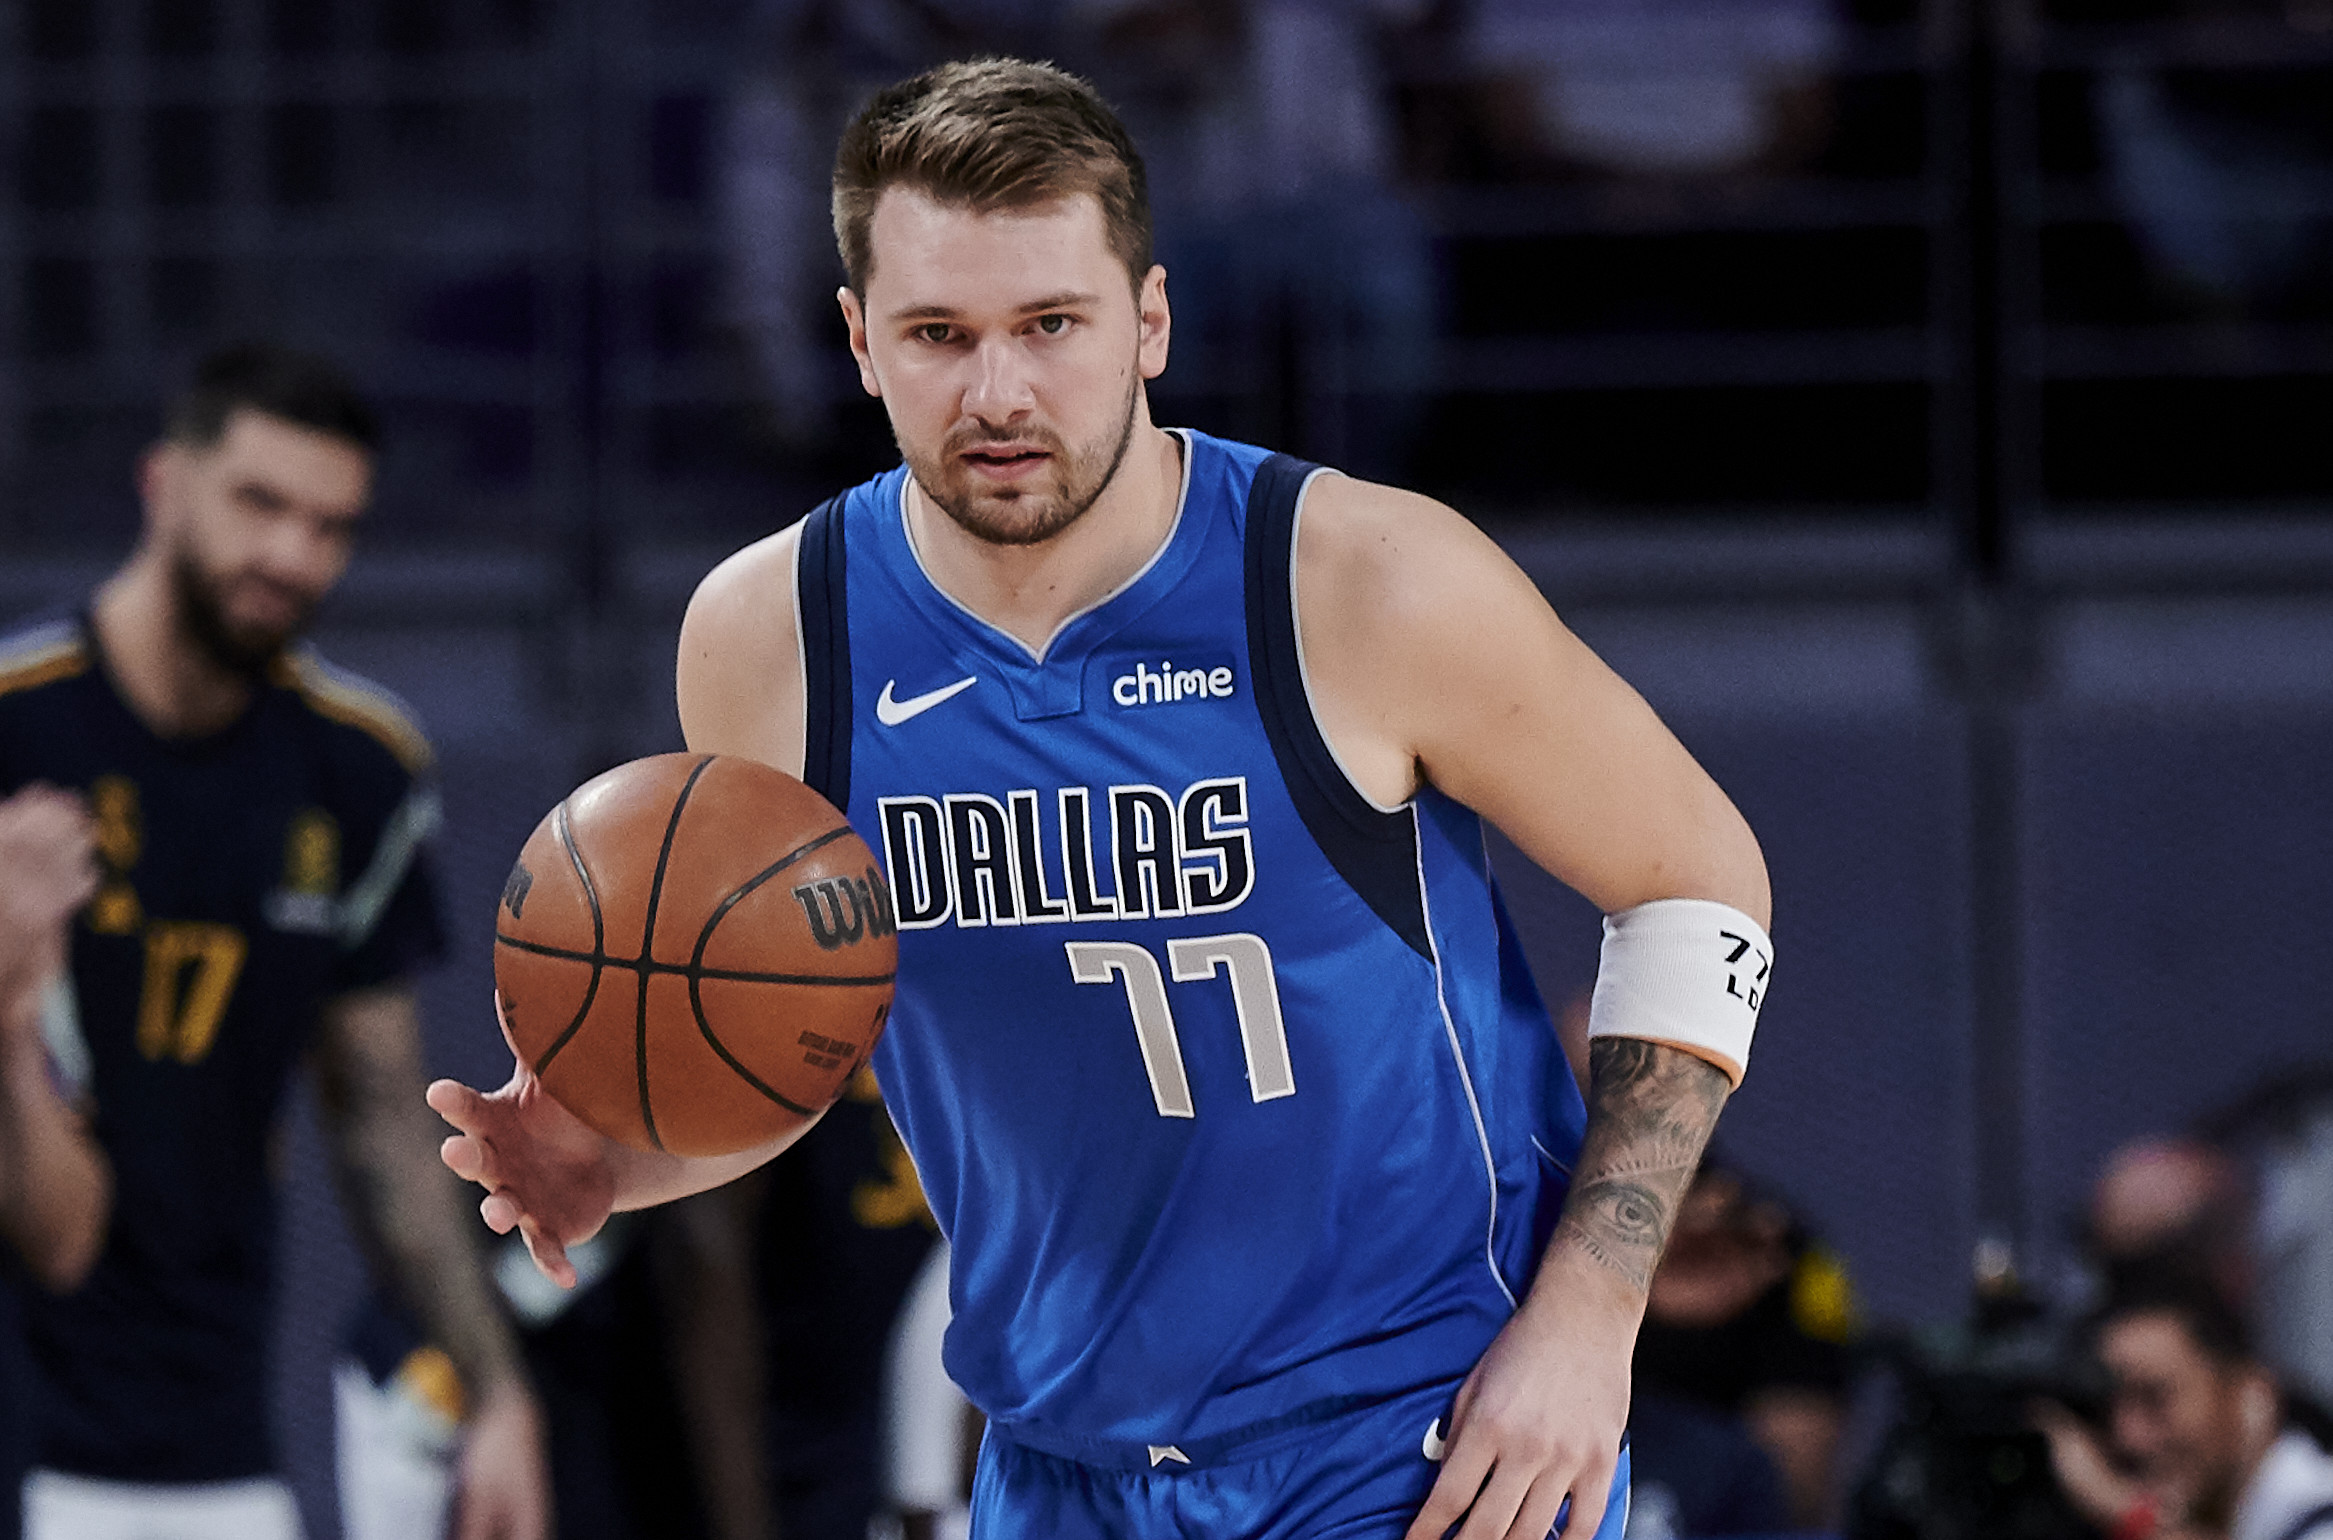 World's best player' Luka Doncic destroyed us, says Argentina coach